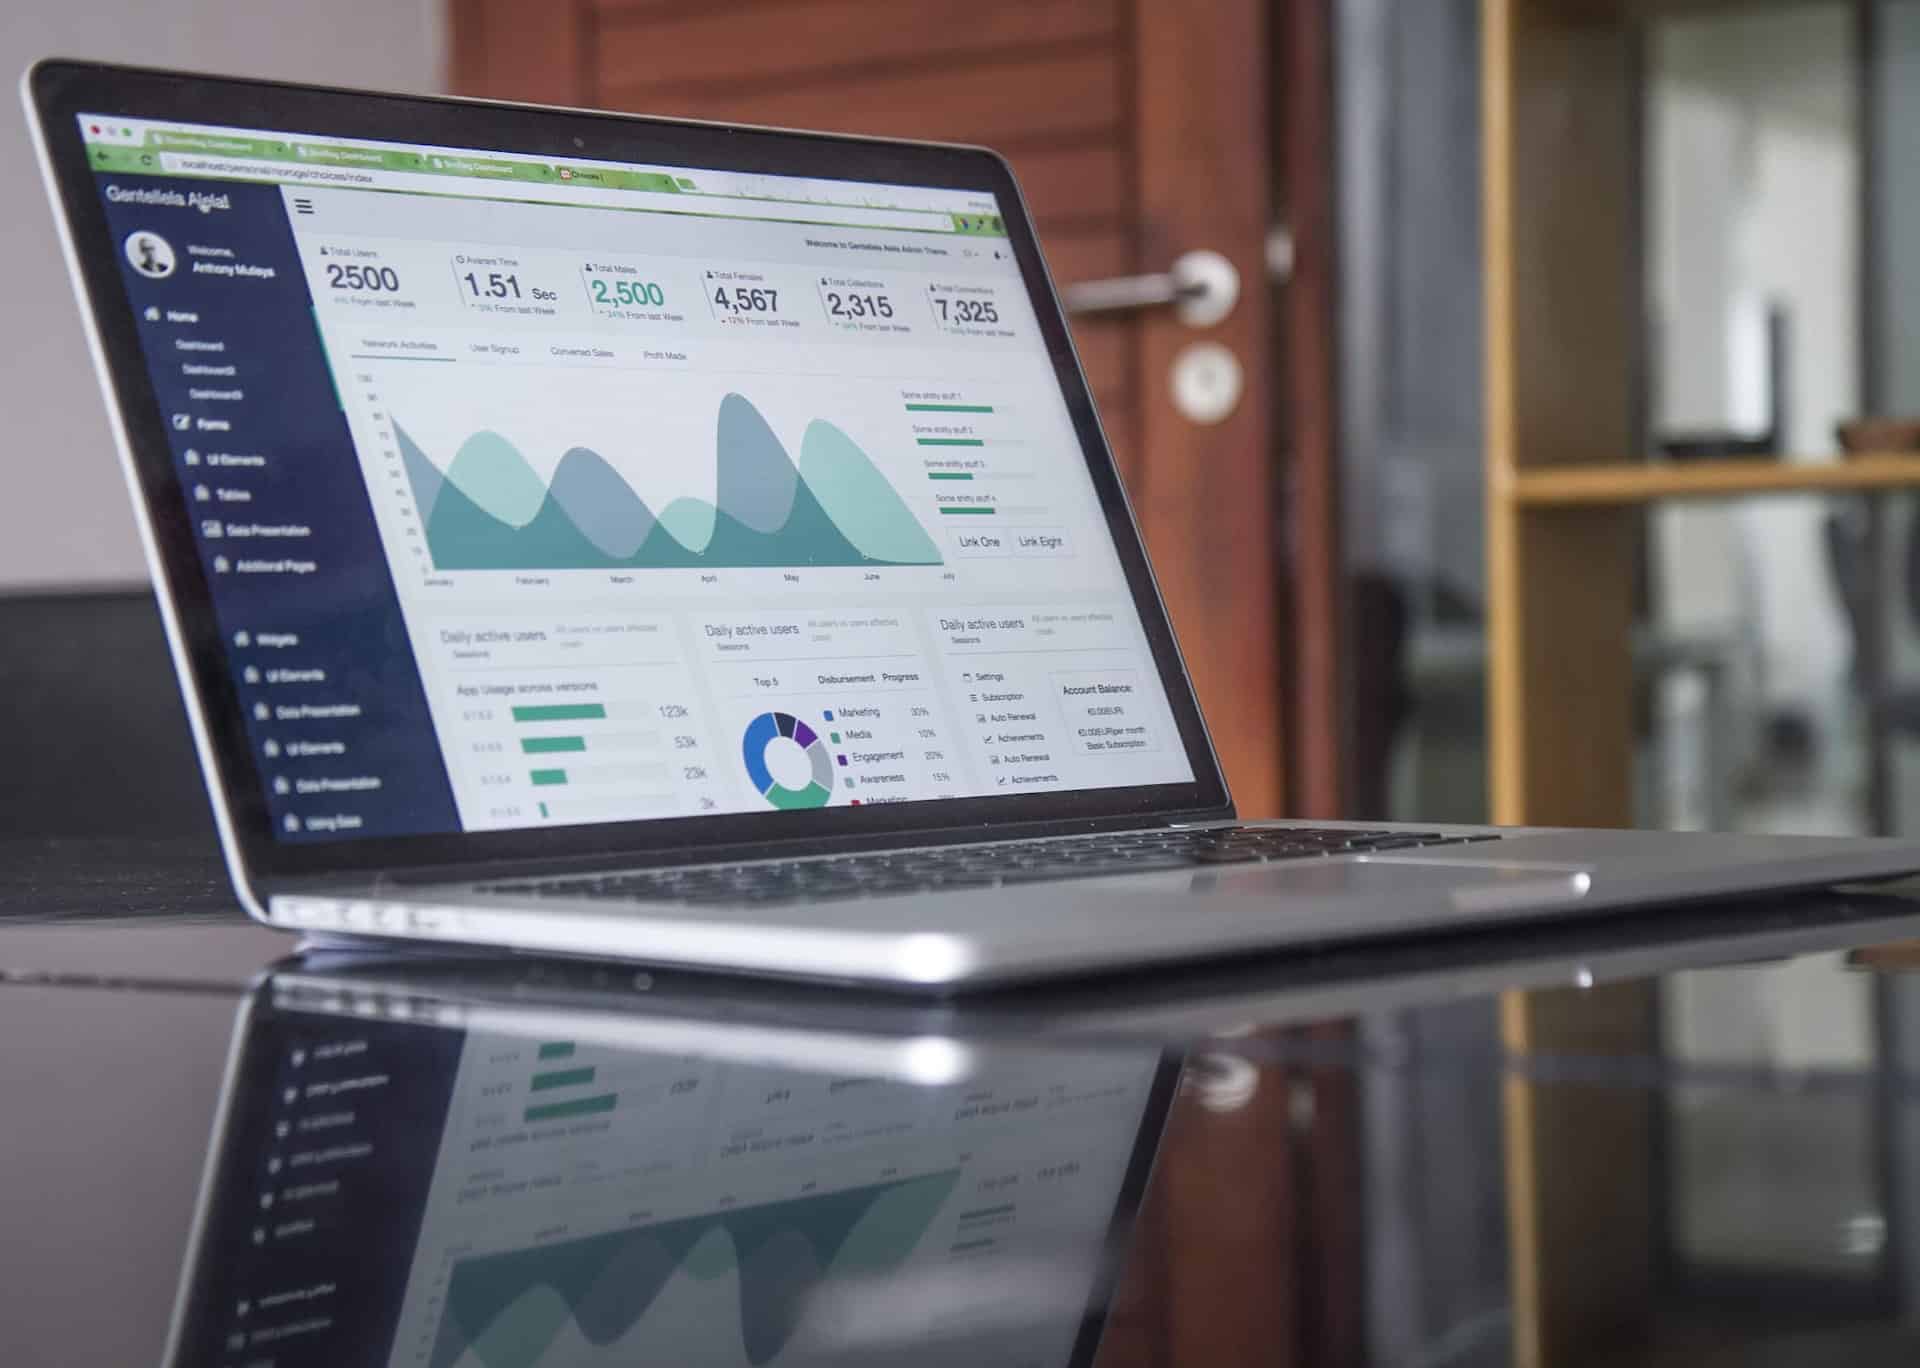 Image Title: Analytics Dashboard Insight Image Description: Laptop displaying the metrics used to measure product launch success Alt Text: Analytics dashboard screen Source: https://unsplash.com/photos/laptop-computer-on-glass-top-table-hpjSkU2UYSU